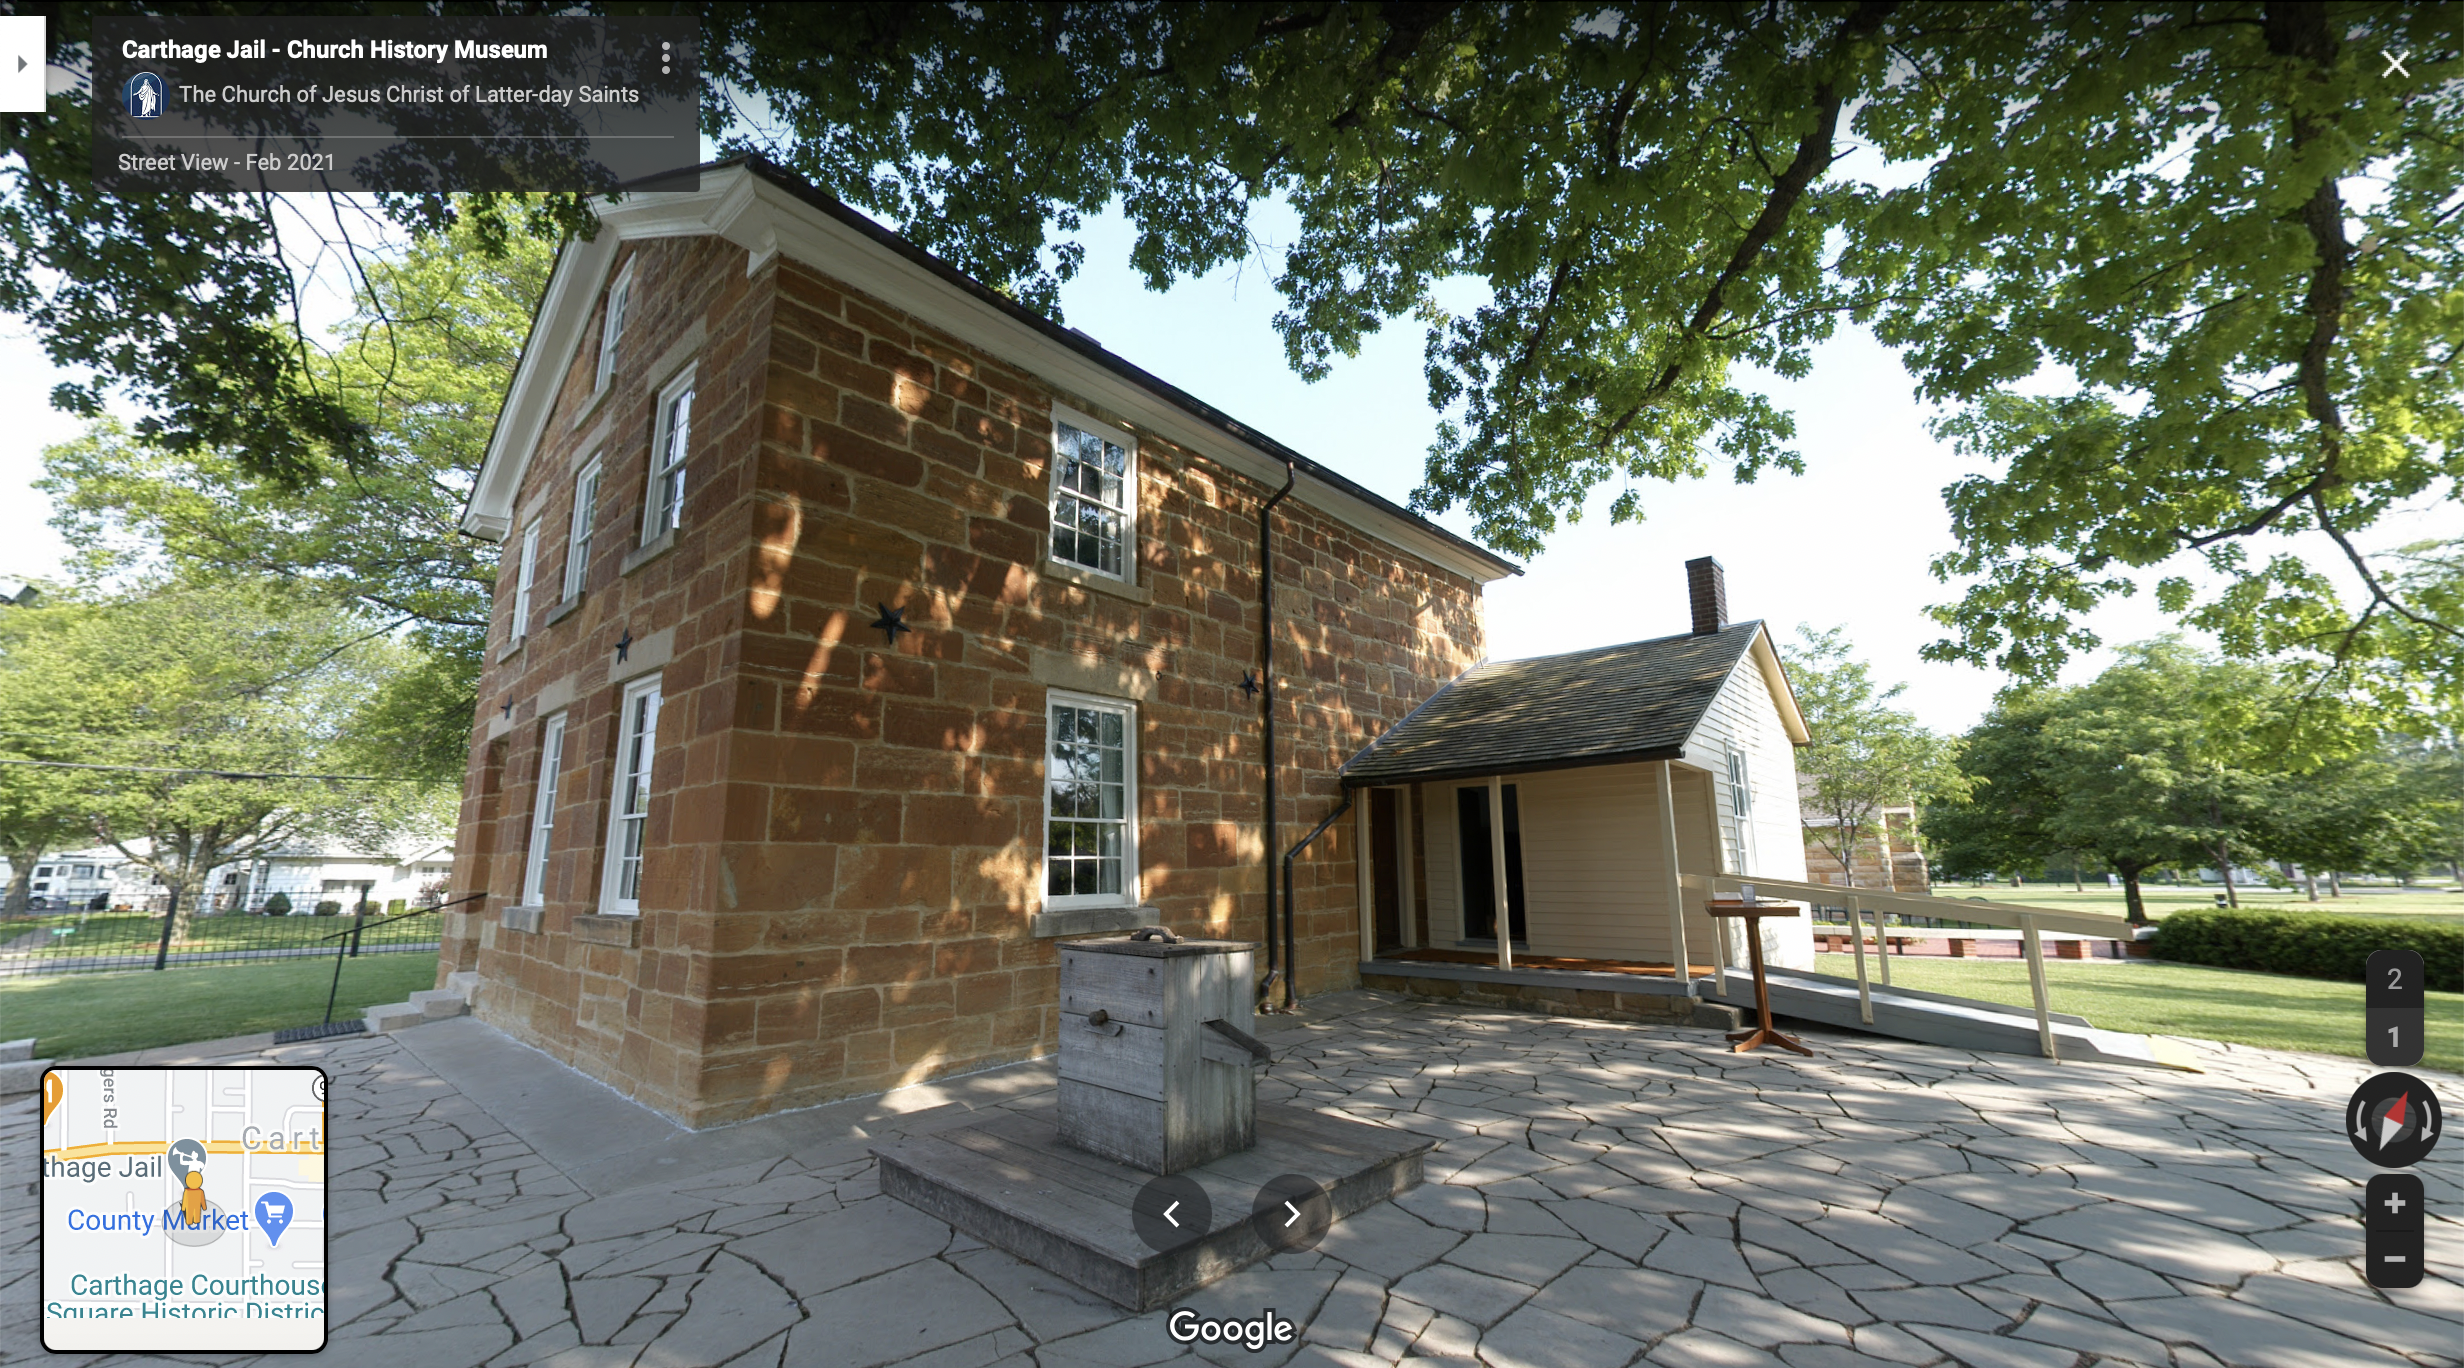 Screenshot of the Google Maps 360 view of the Carthage Jail